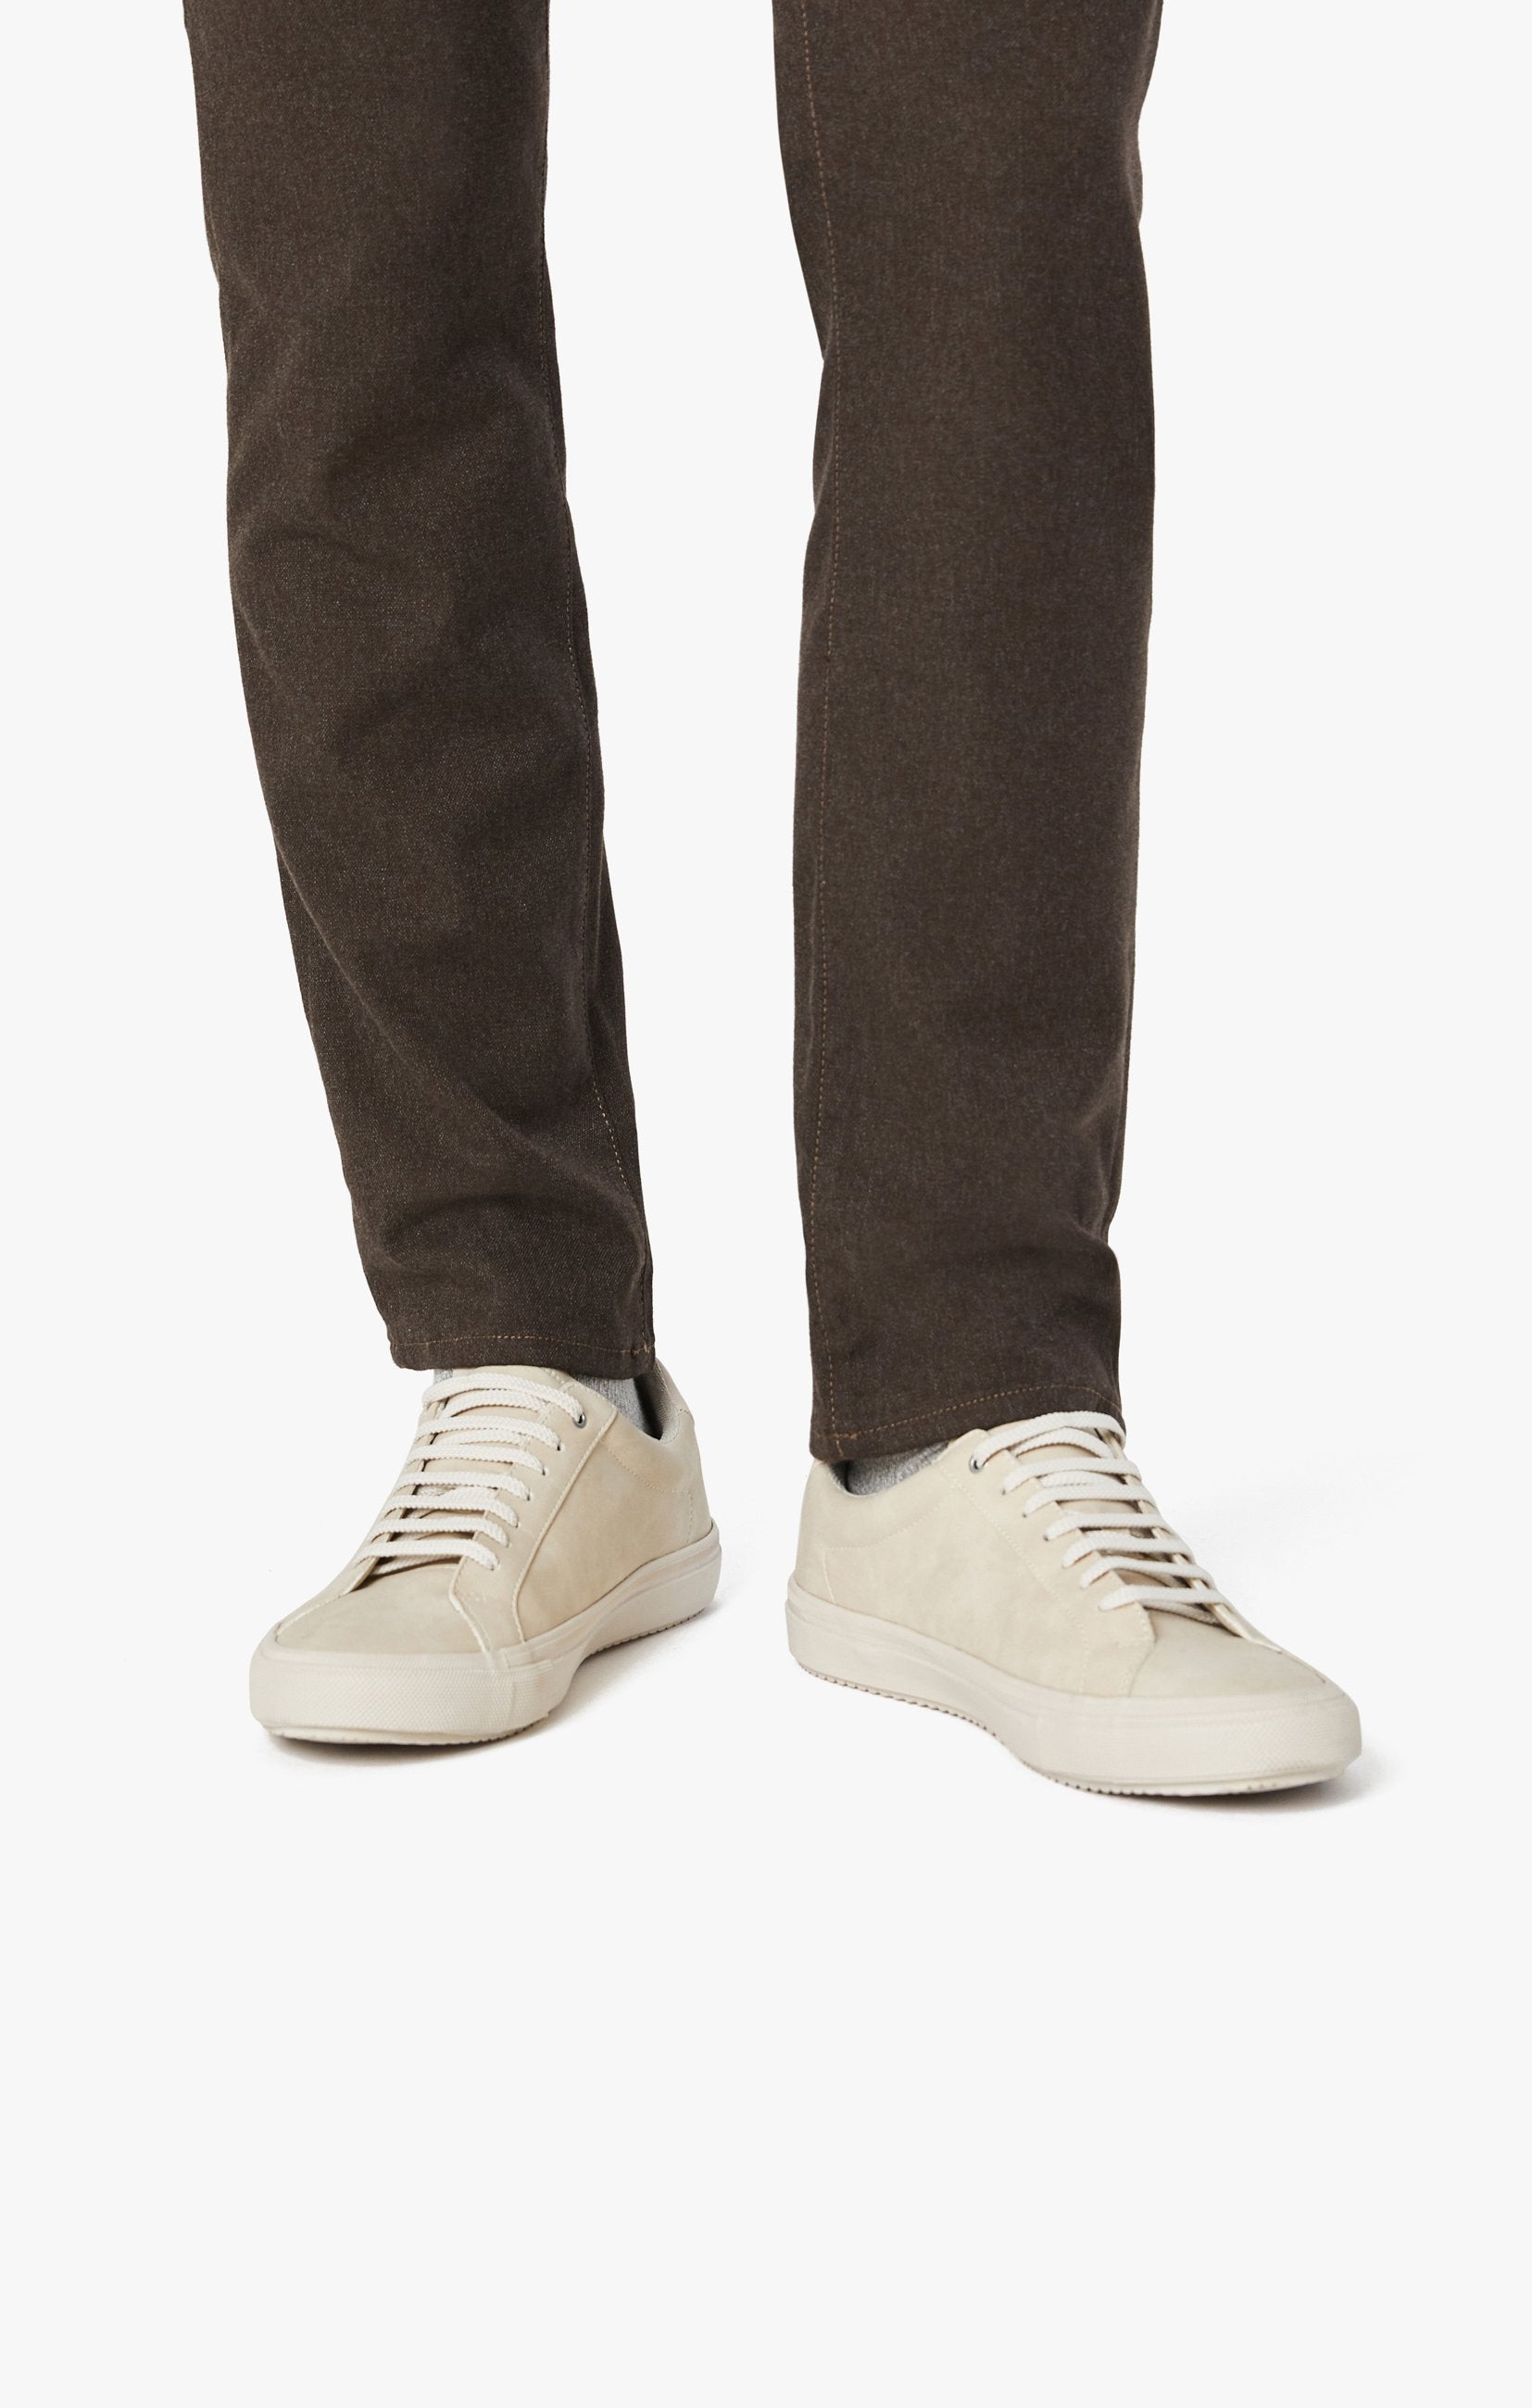 Courage Straight Leg Pants In Coffee Supreme Image 8